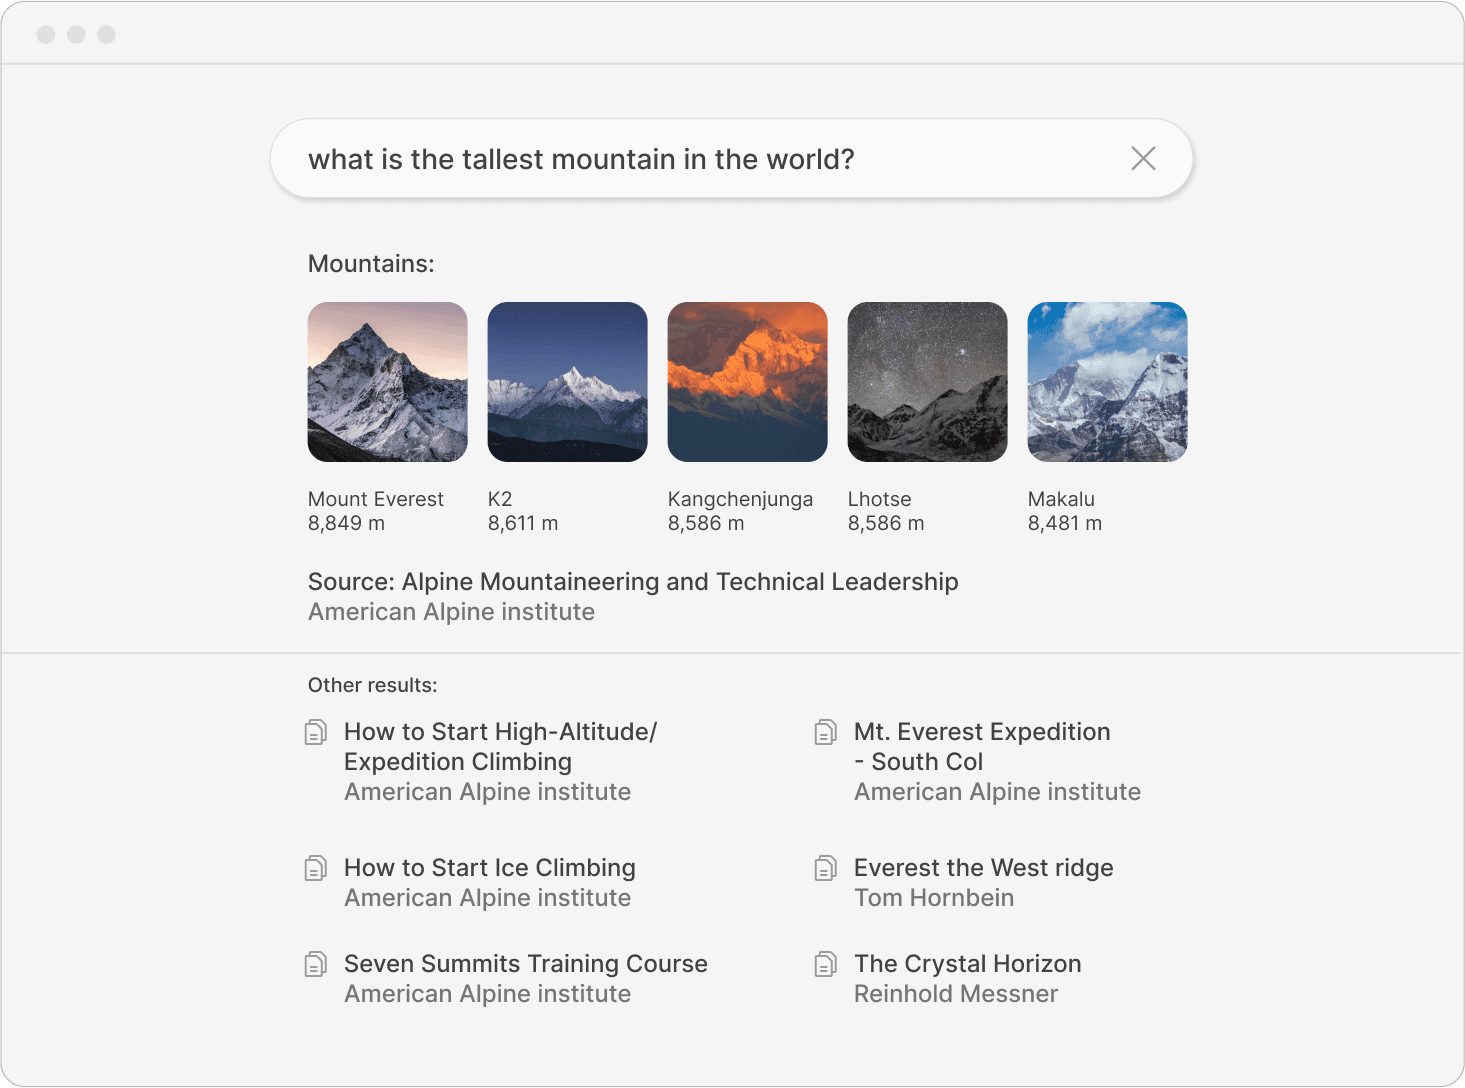 Using Cohere to search what the tallest mountain in the world is